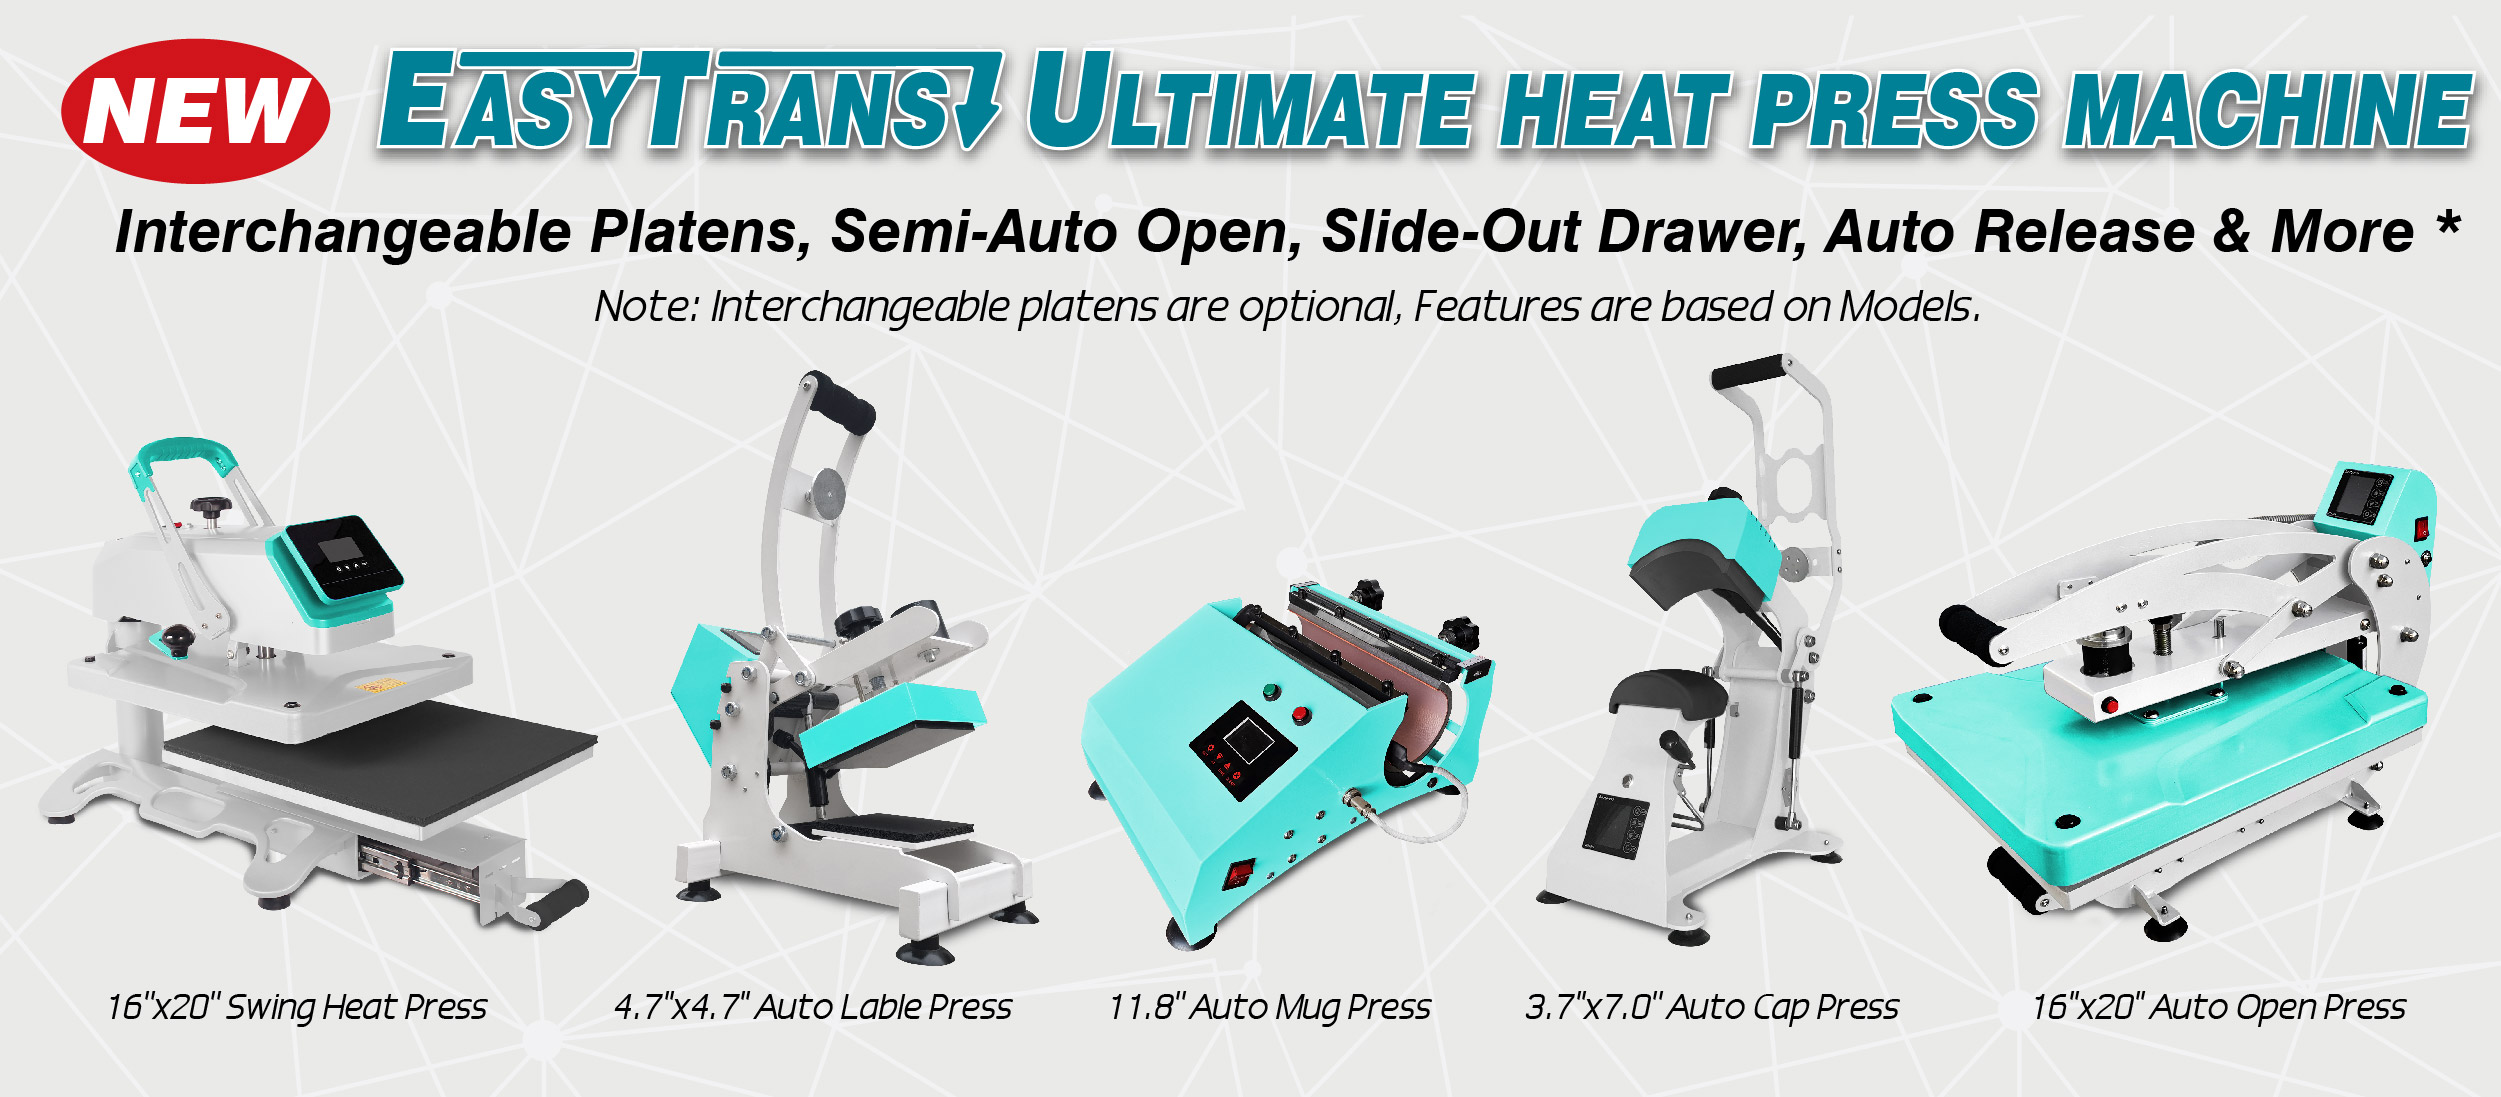 EasyTrans Ultimate Heat Press Machine – The Ultimate Solution for Your Custom Apparel Business